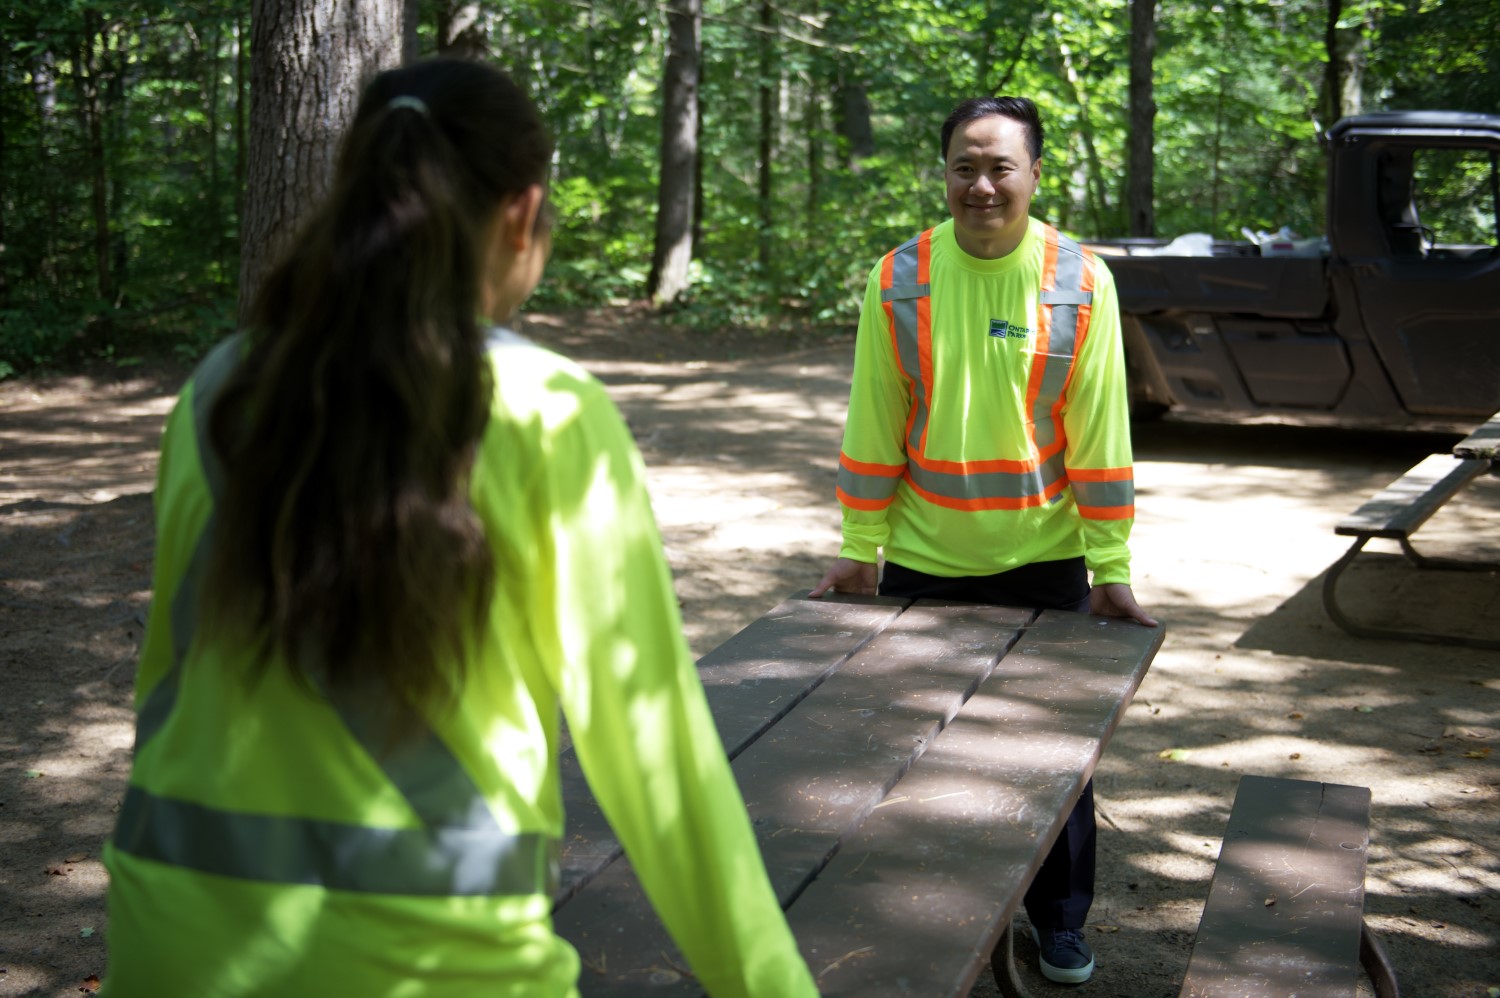 Two Ontario Parks staff members wearing neon yellow high visibility shirts. Together, they are lifting and moving a wooden picnic table.